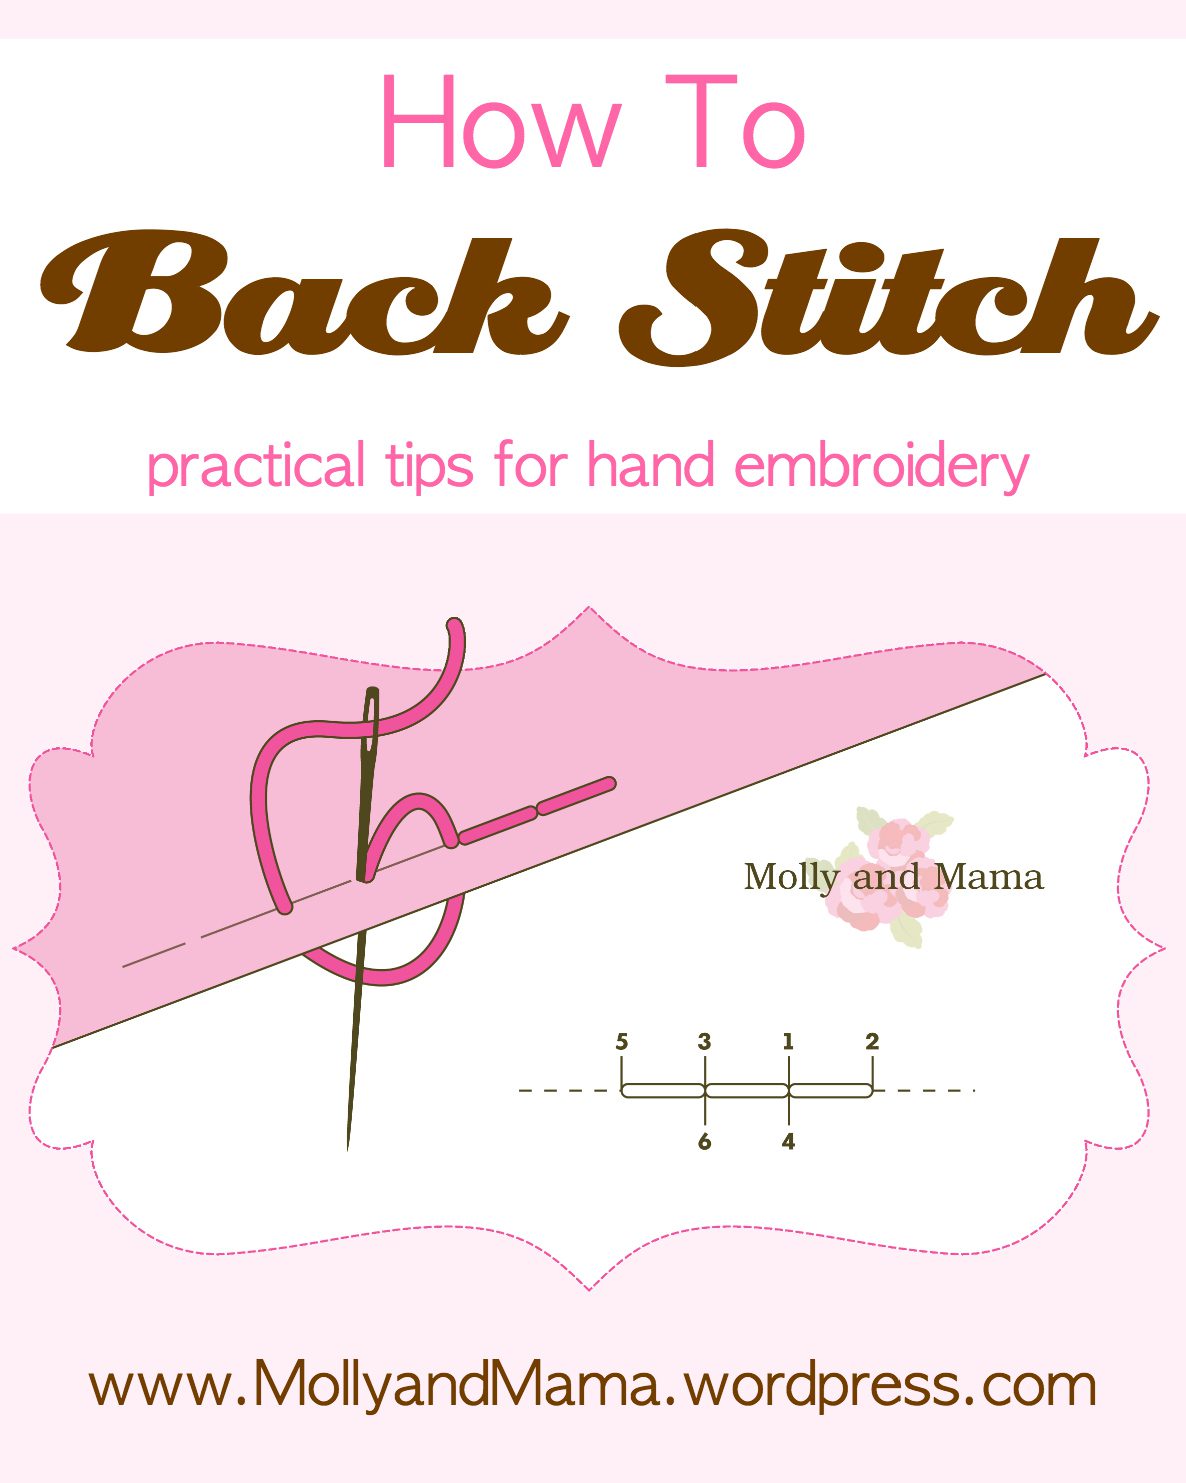 How to Back Stitch – practical tips for Hand Embroidery